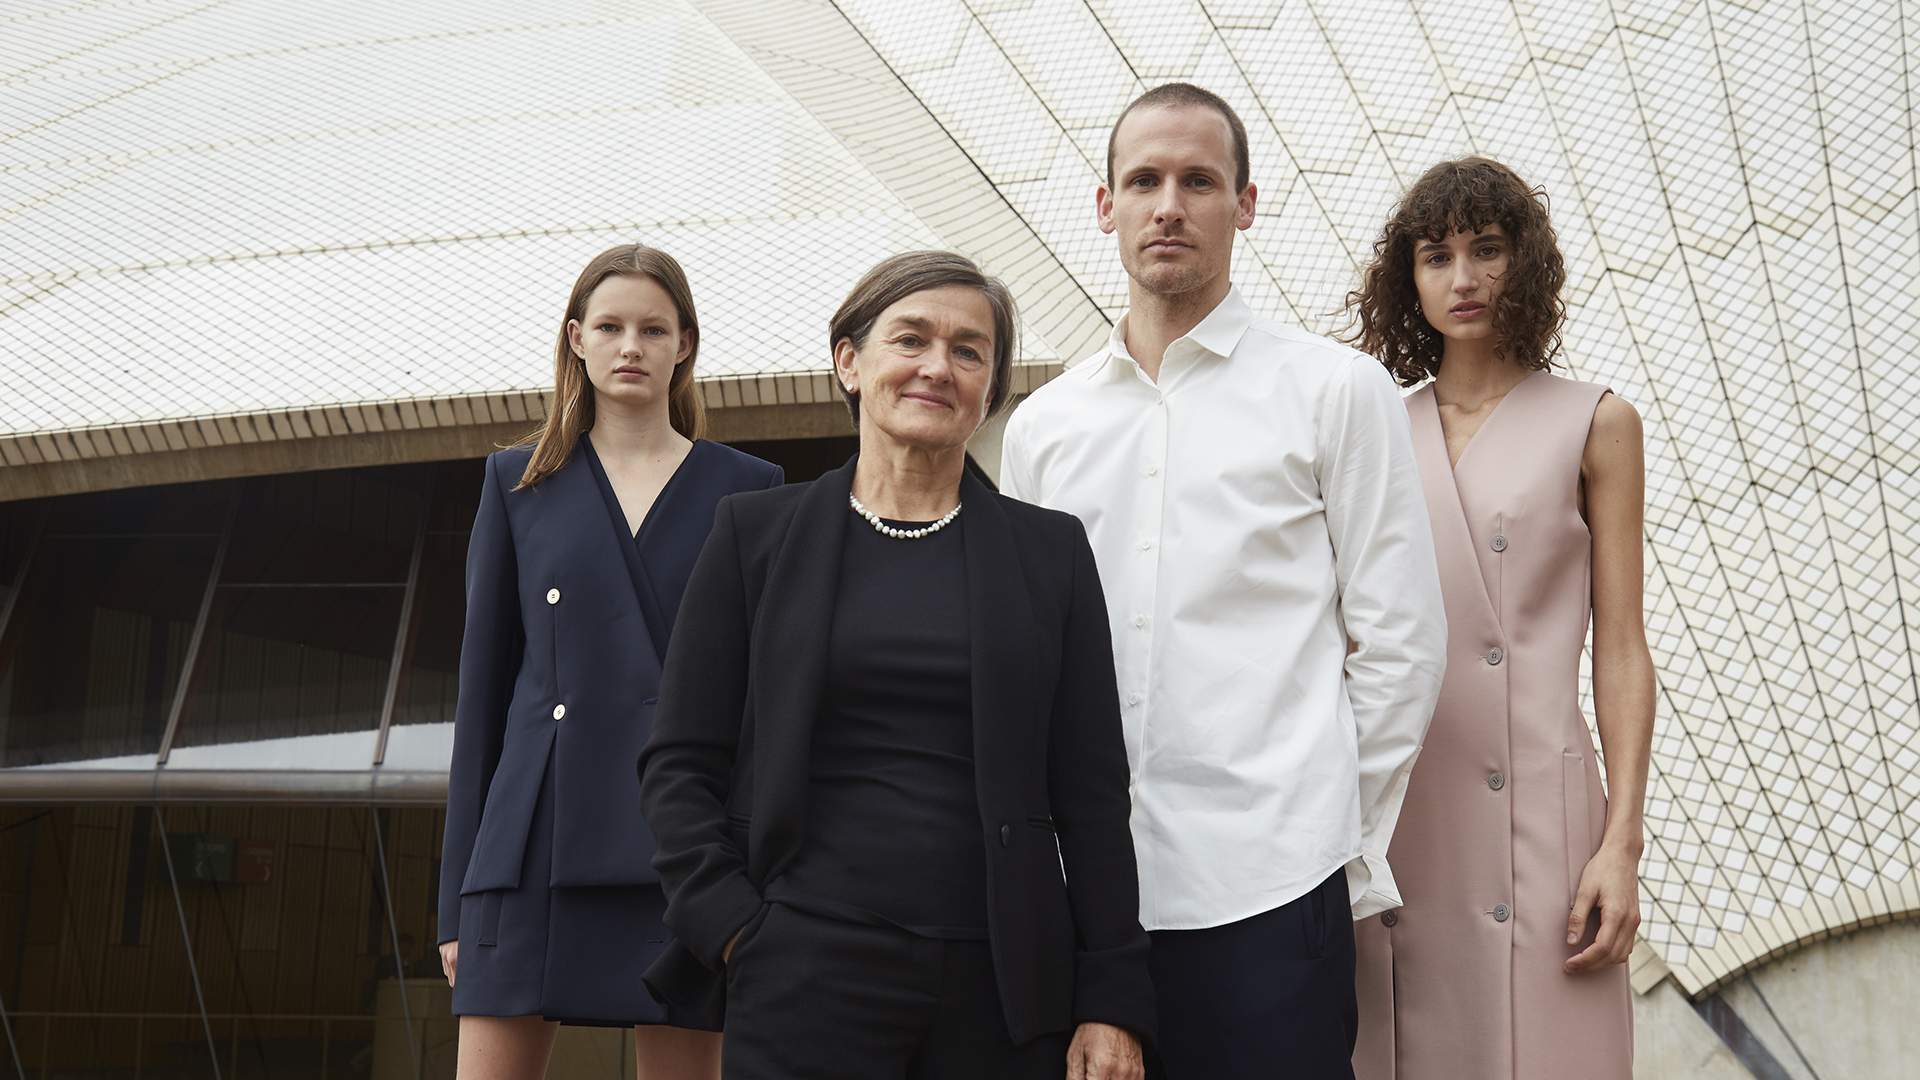 Dion Lee to Design New Uniforms for the Sydney Opera House